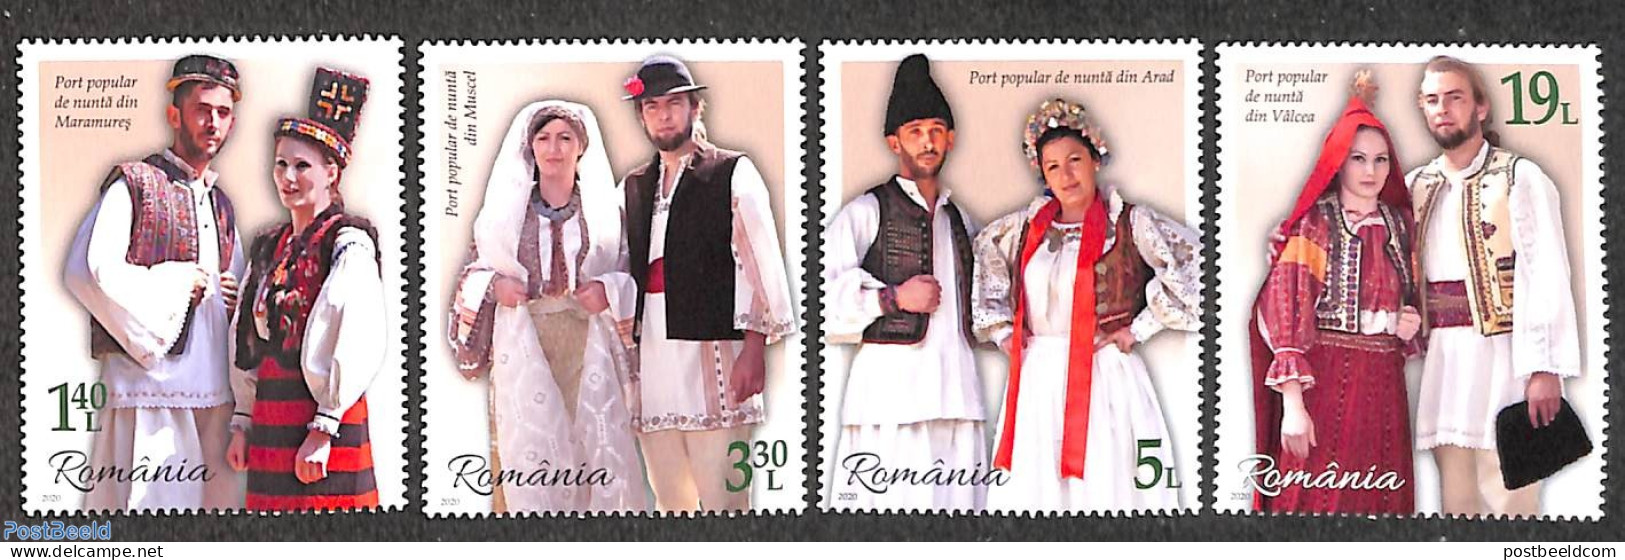 Romania 2020 Wedding Costumes 4v, Mint NH, Various - Costumes - Unused Stamps